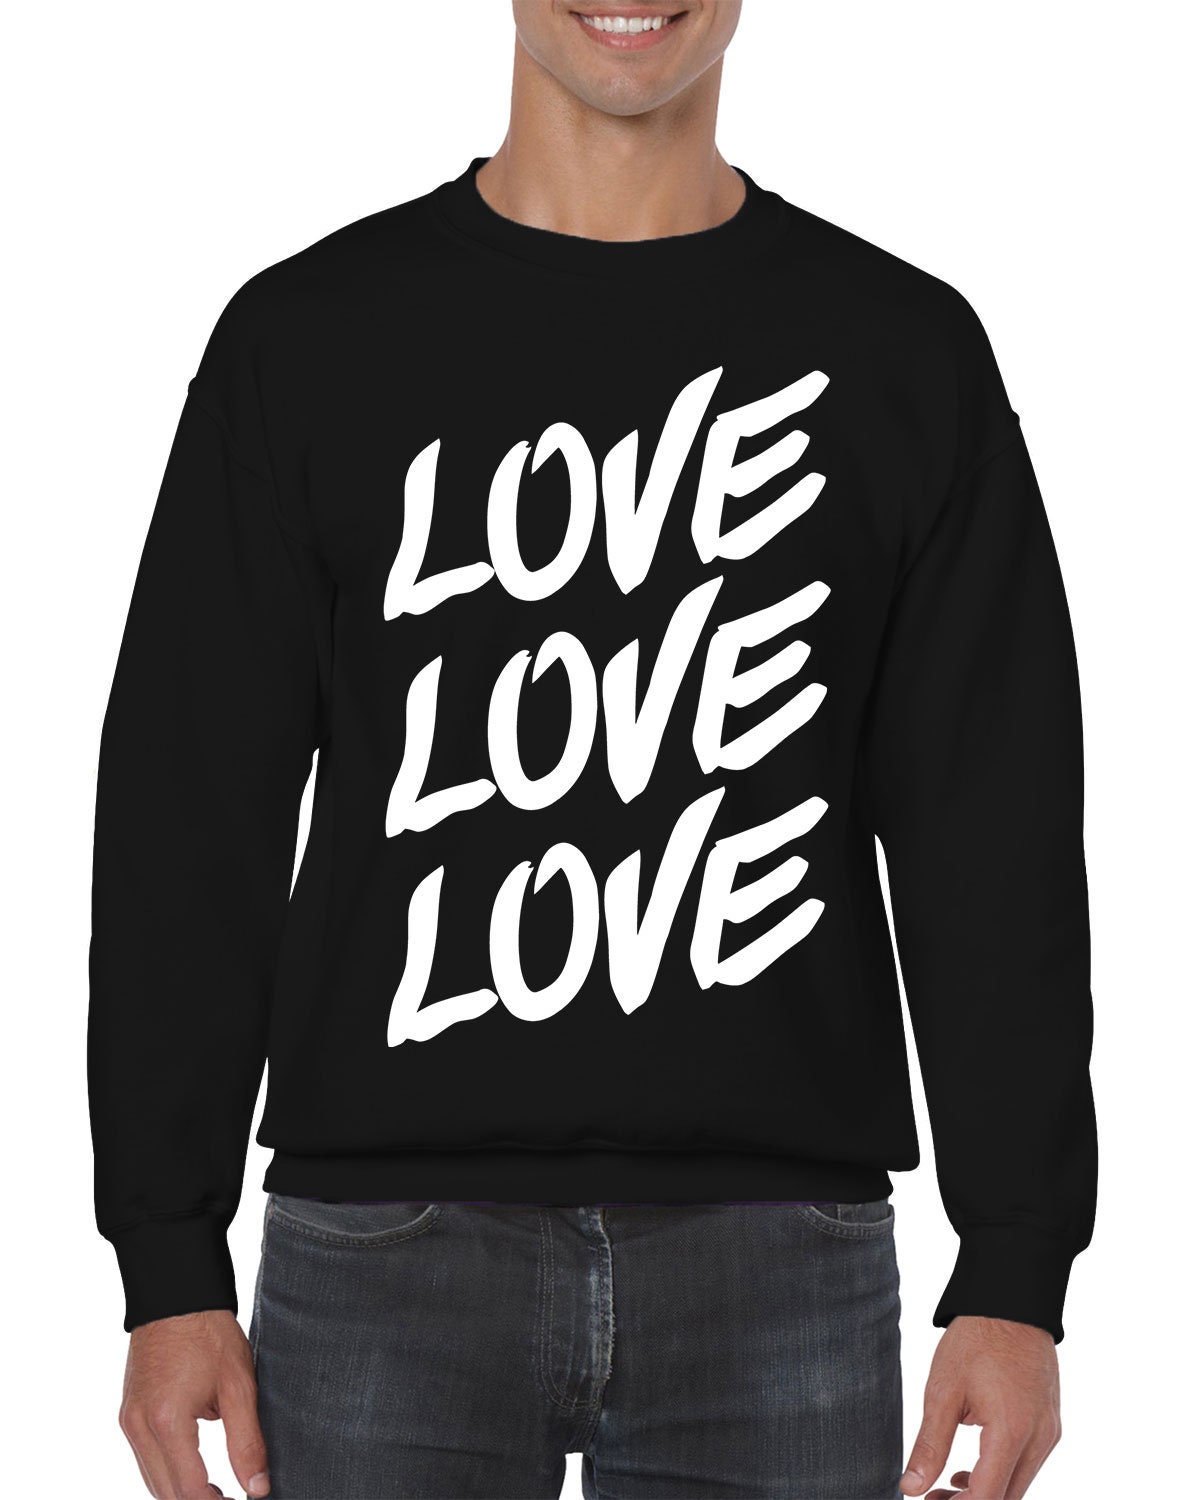 Love Love Love Love Happiness Good Vibes Gay LGBT Pride - Etsy